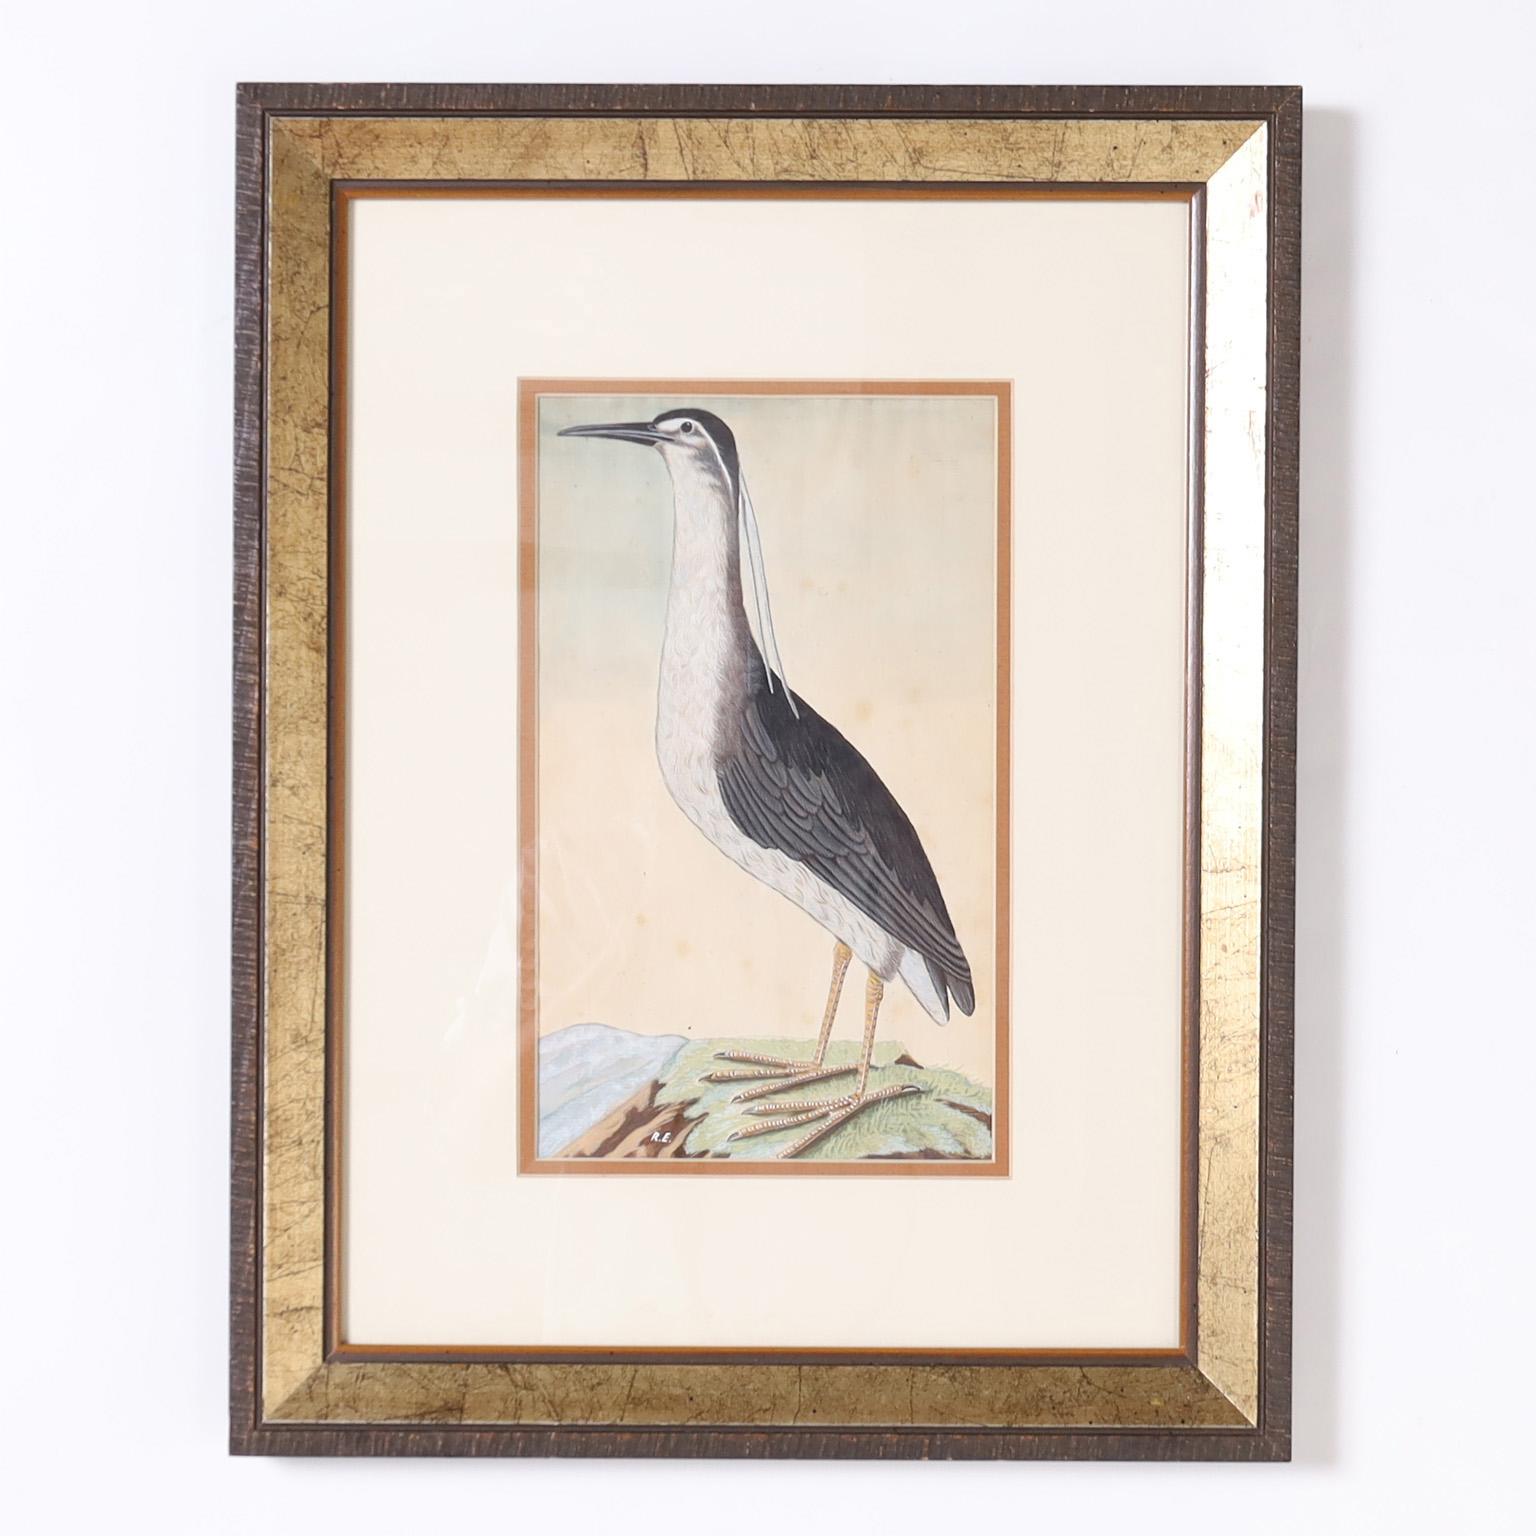 Unknown Animal Art - Watercolor Painting of a Night Heron